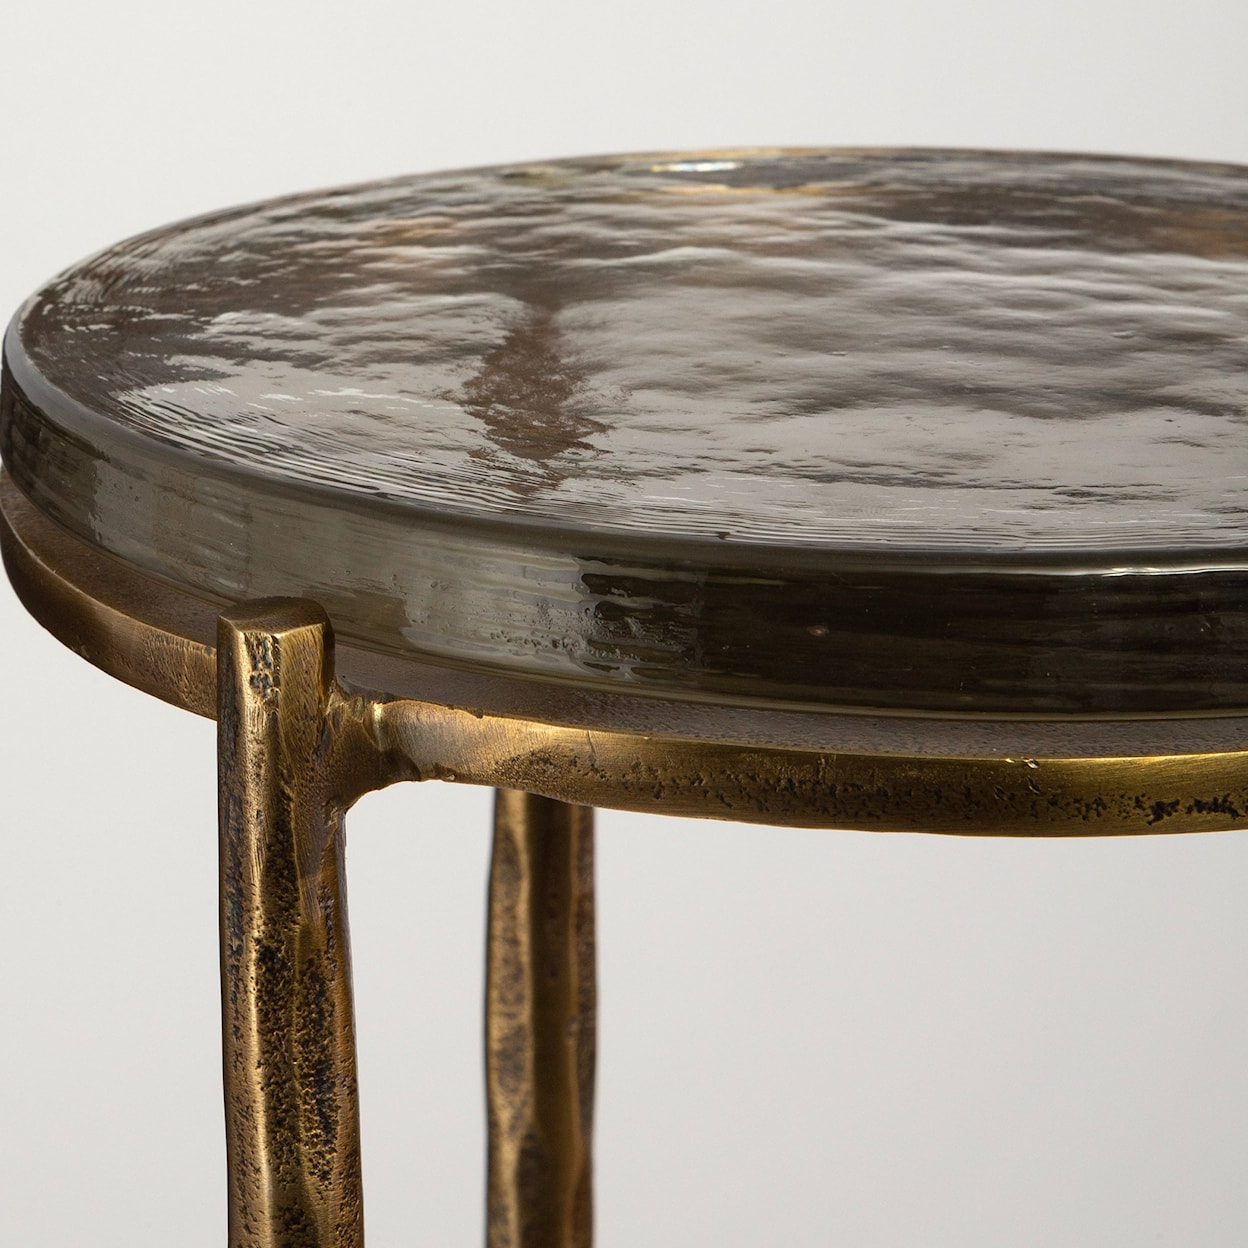 Uttermost Eternity Eternity Brass Accent Table